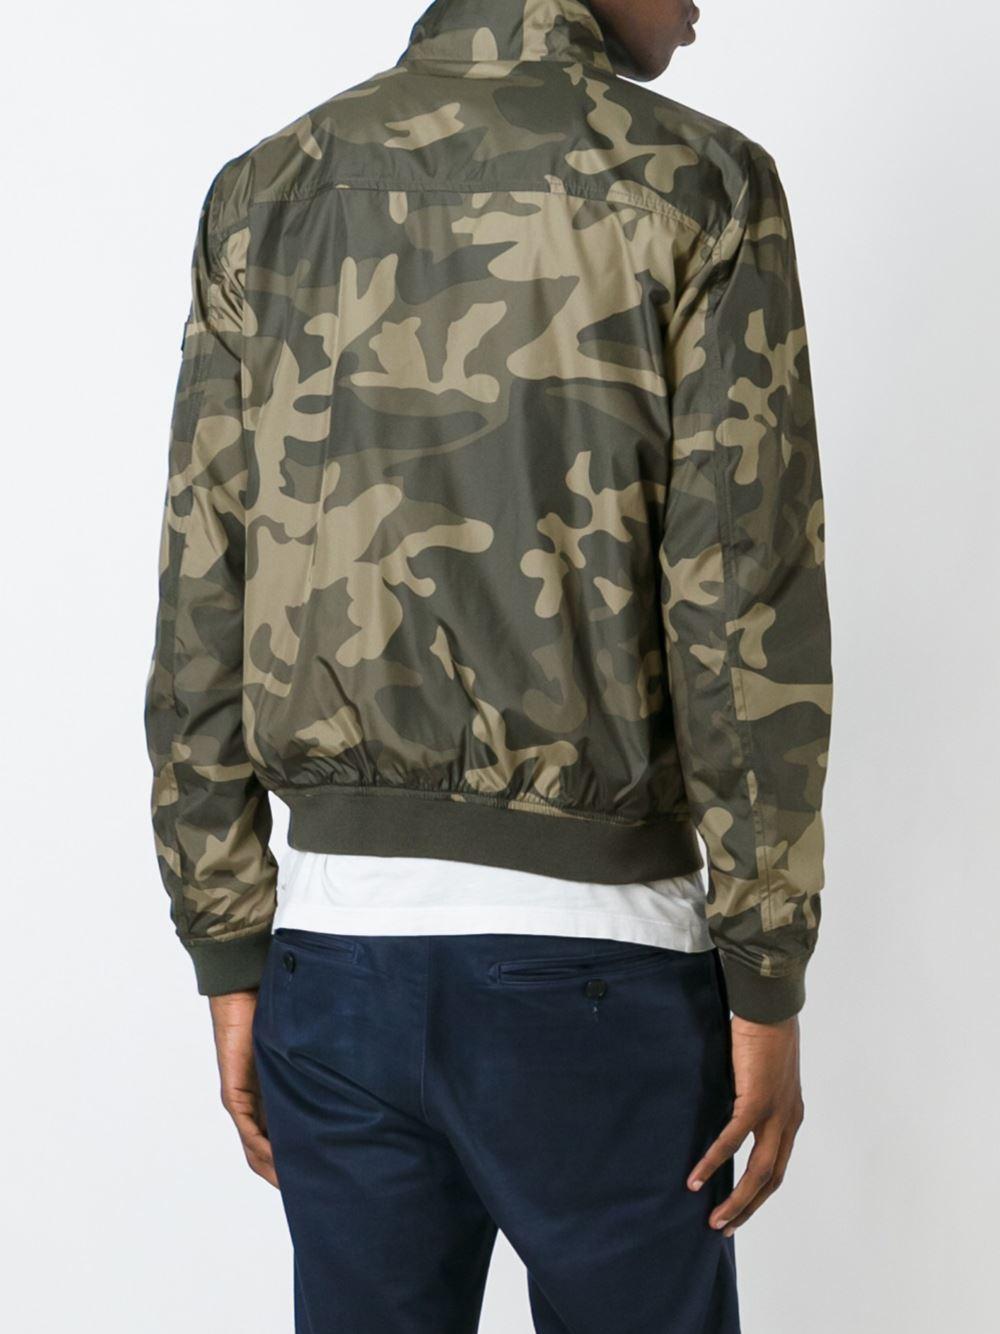 Lyst - Woolrich Camouflage Reversible Bomber Jacket in Green for Men